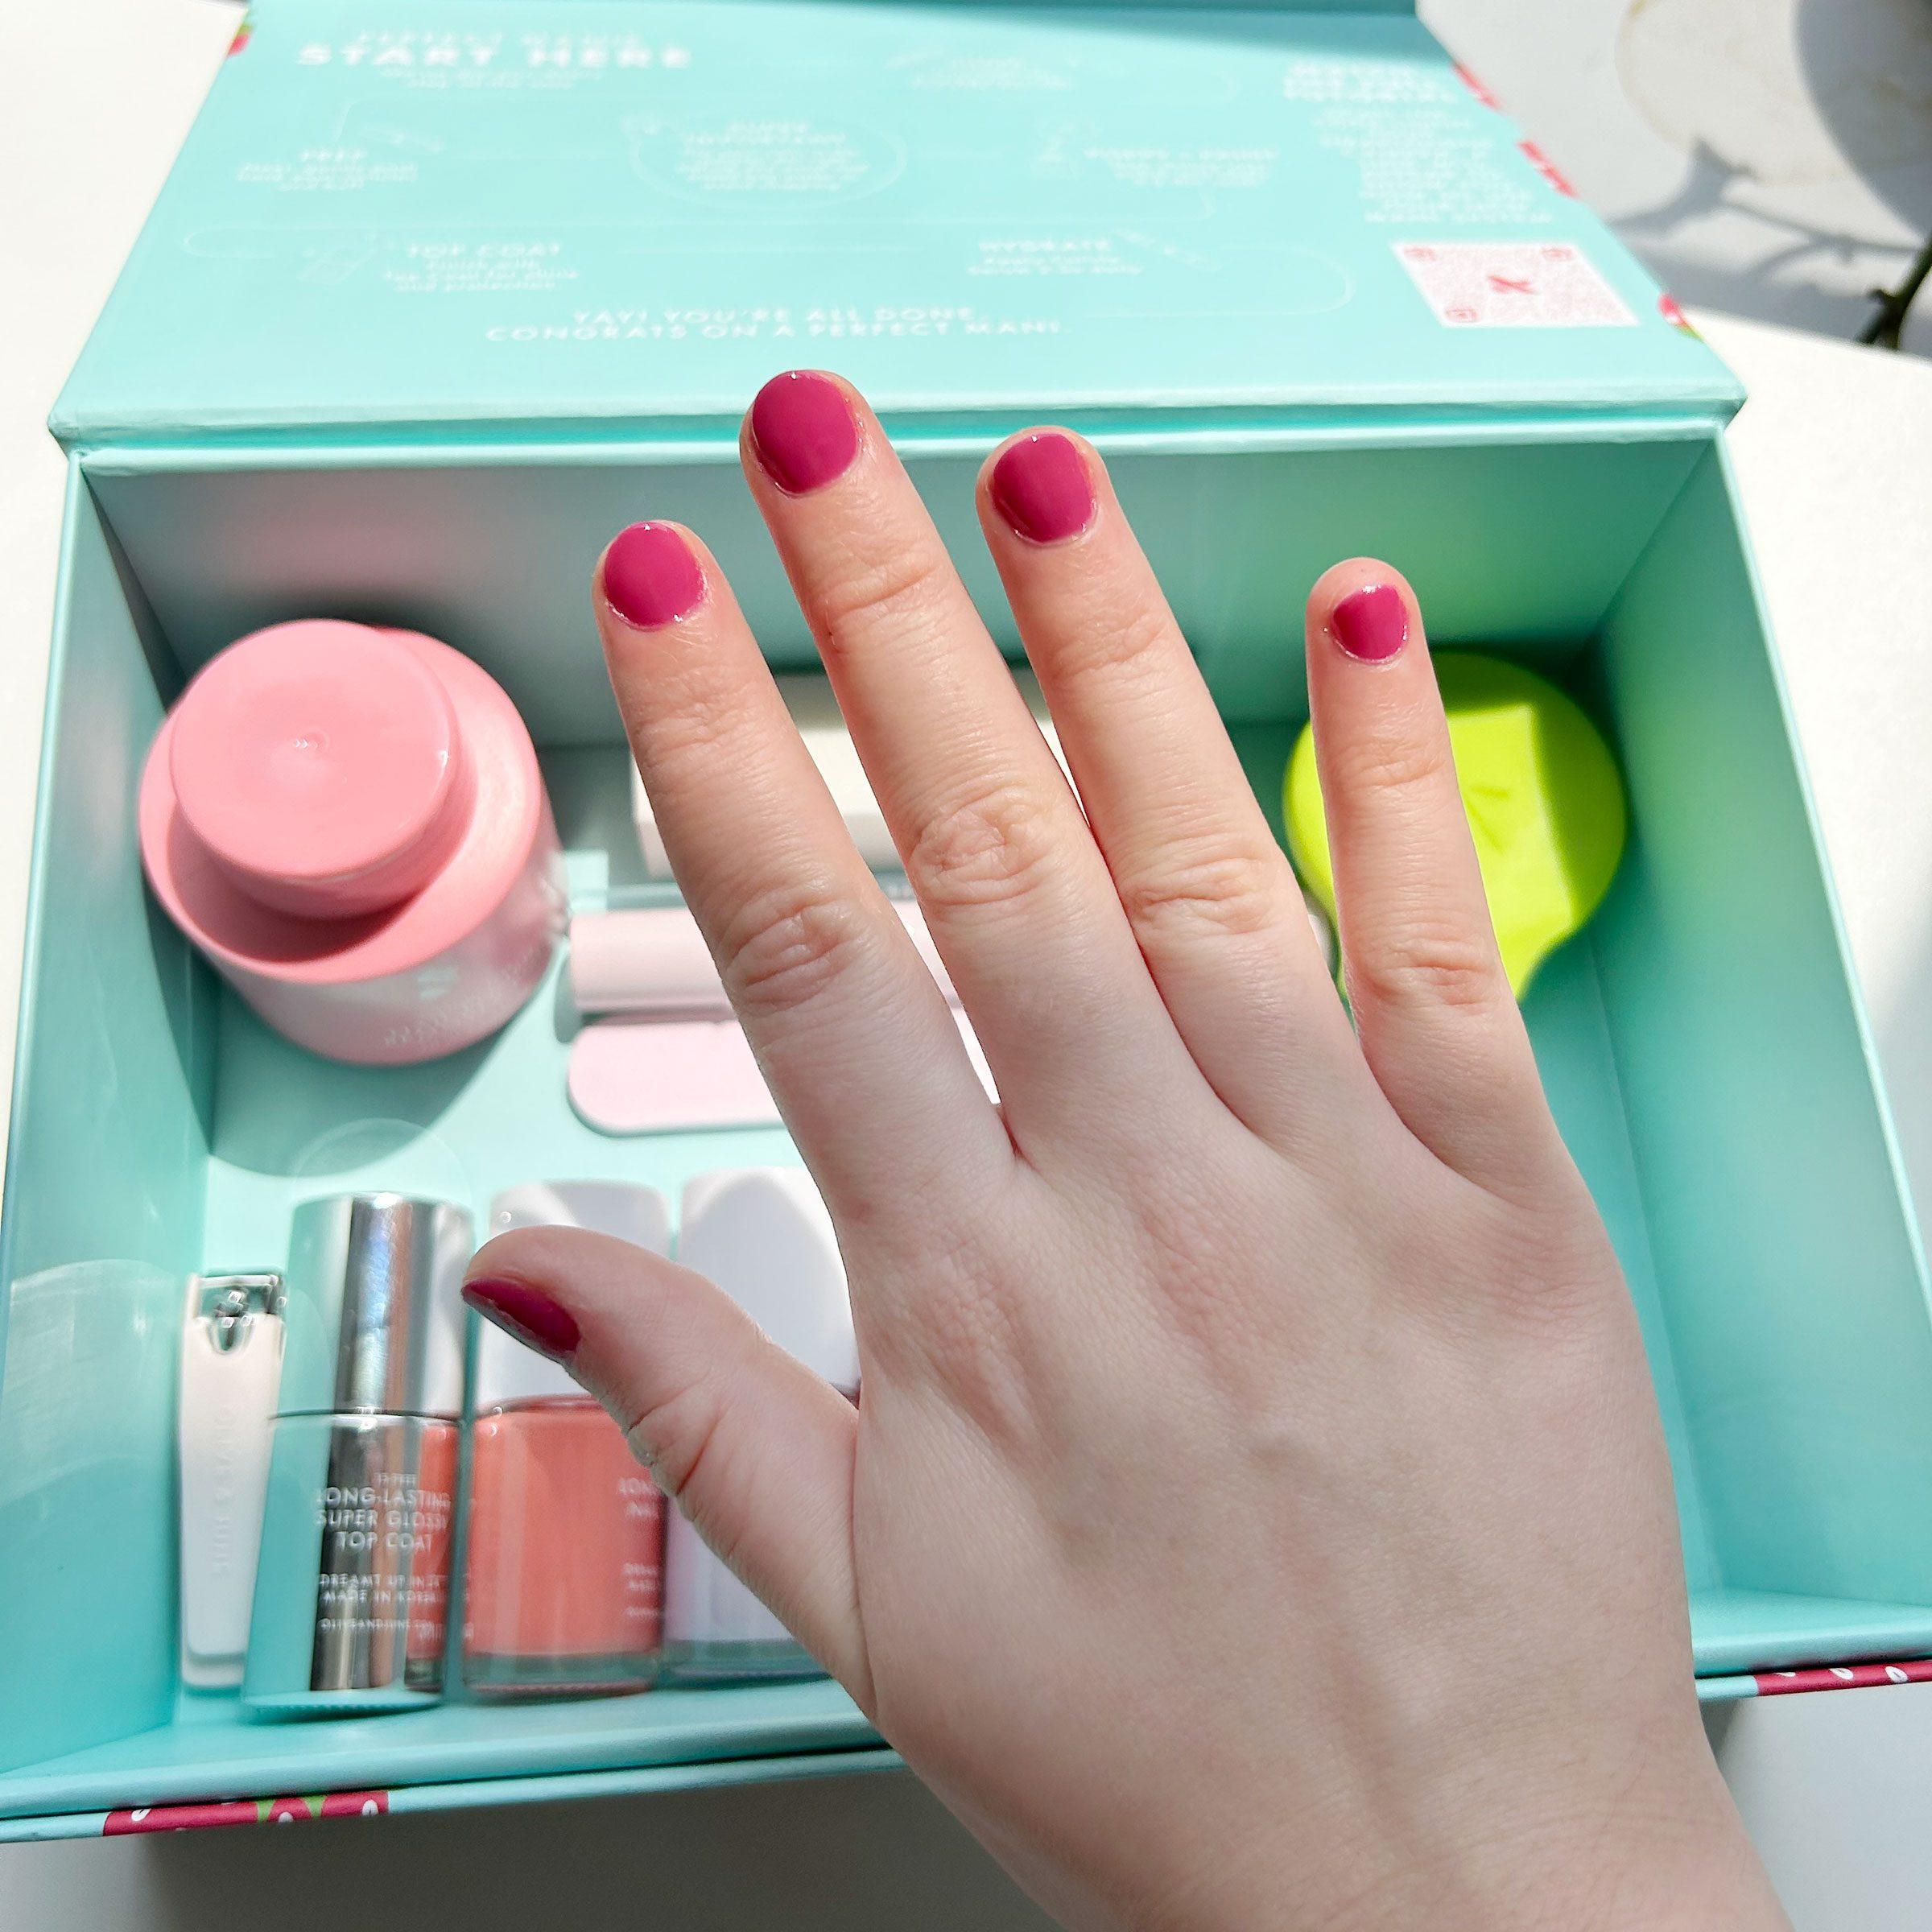 Get your manicure to the next level with Booming Nail & Hand Care - always  inspiring more